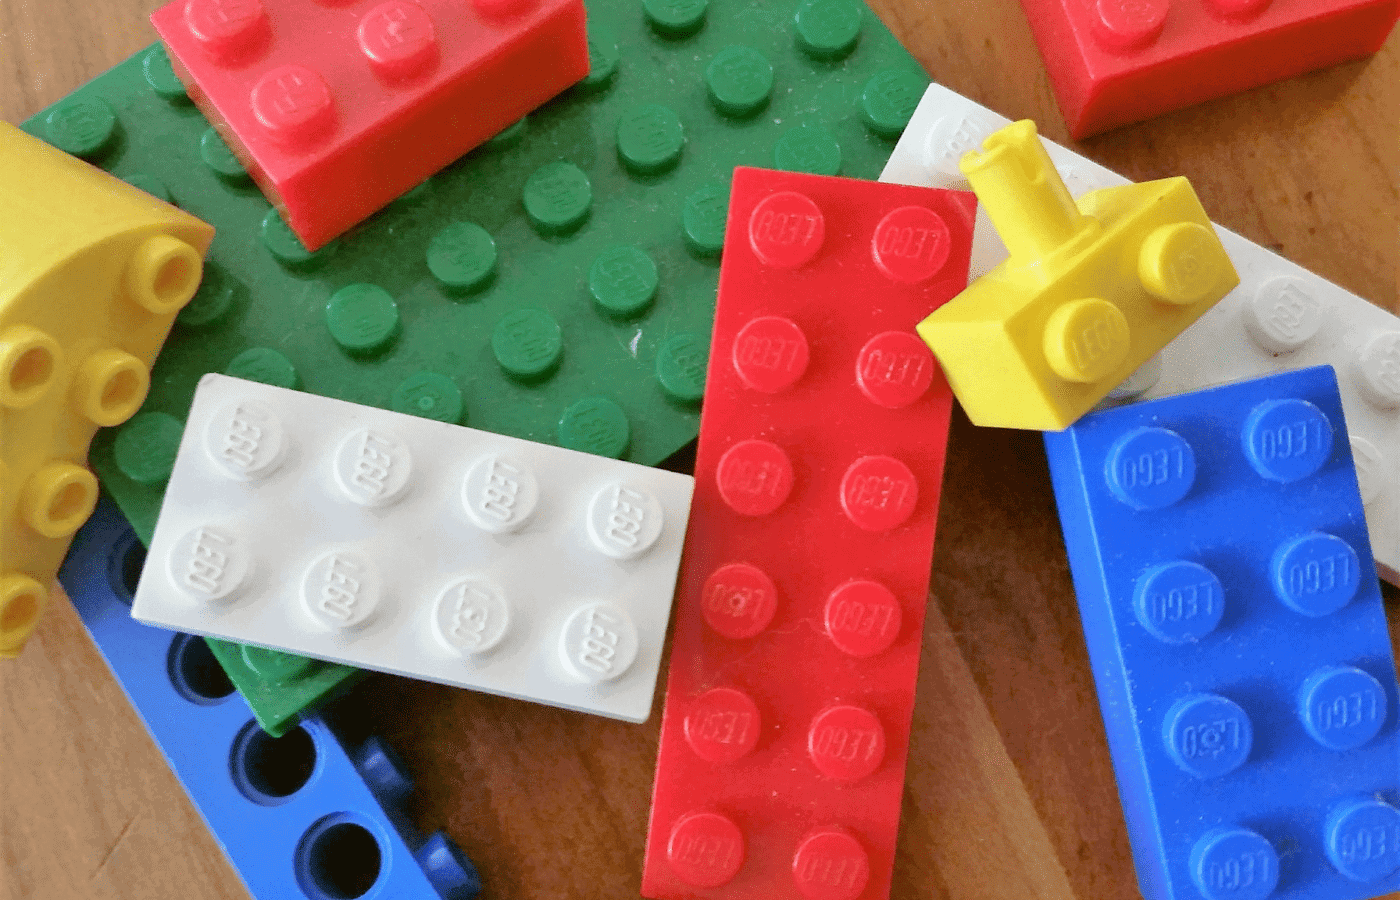 How to Clean Mold off Legos